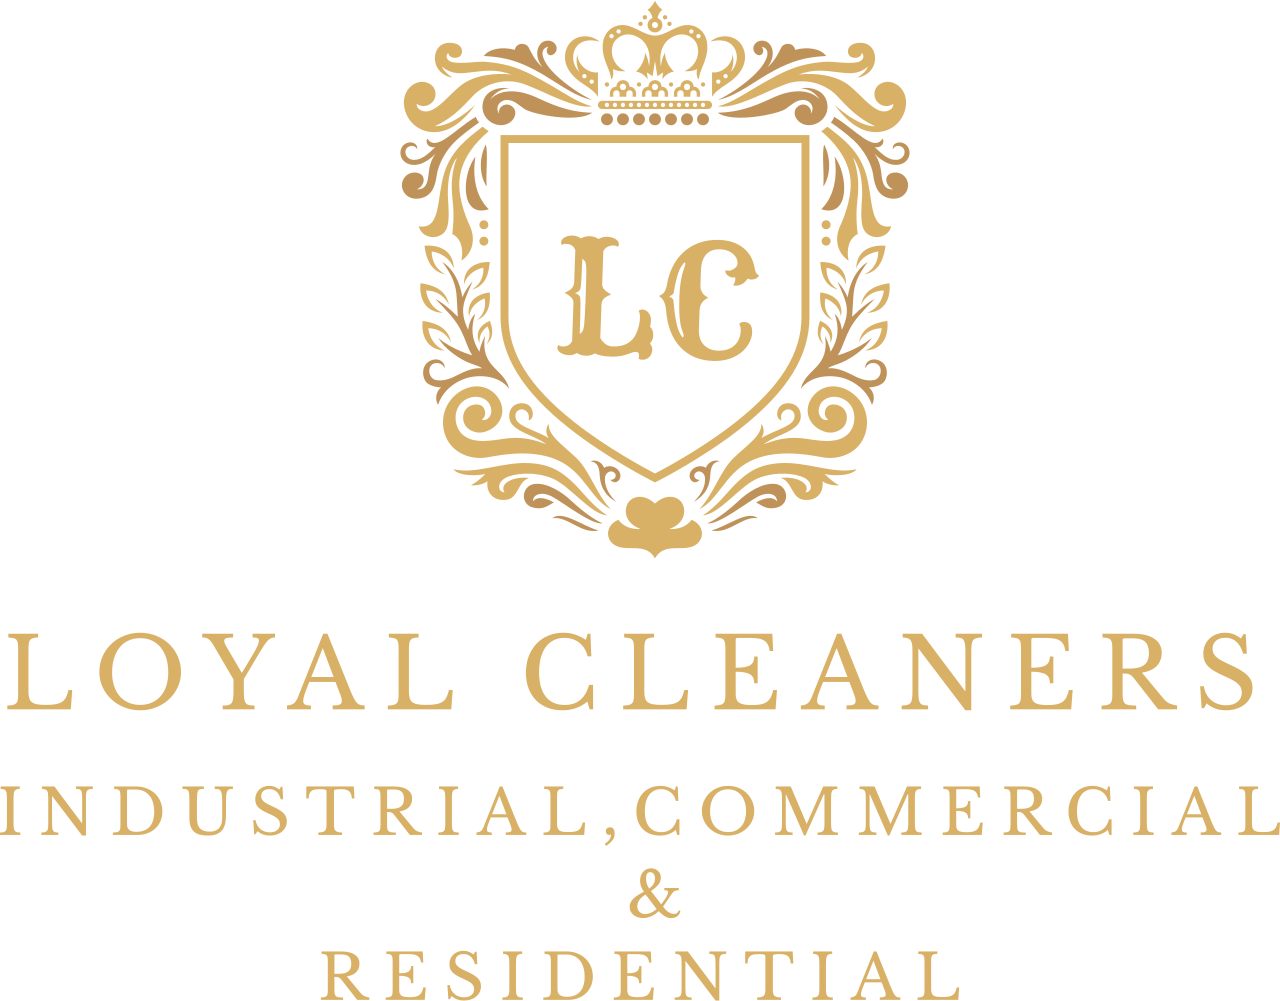 LOYAL CLEANERS 's web page